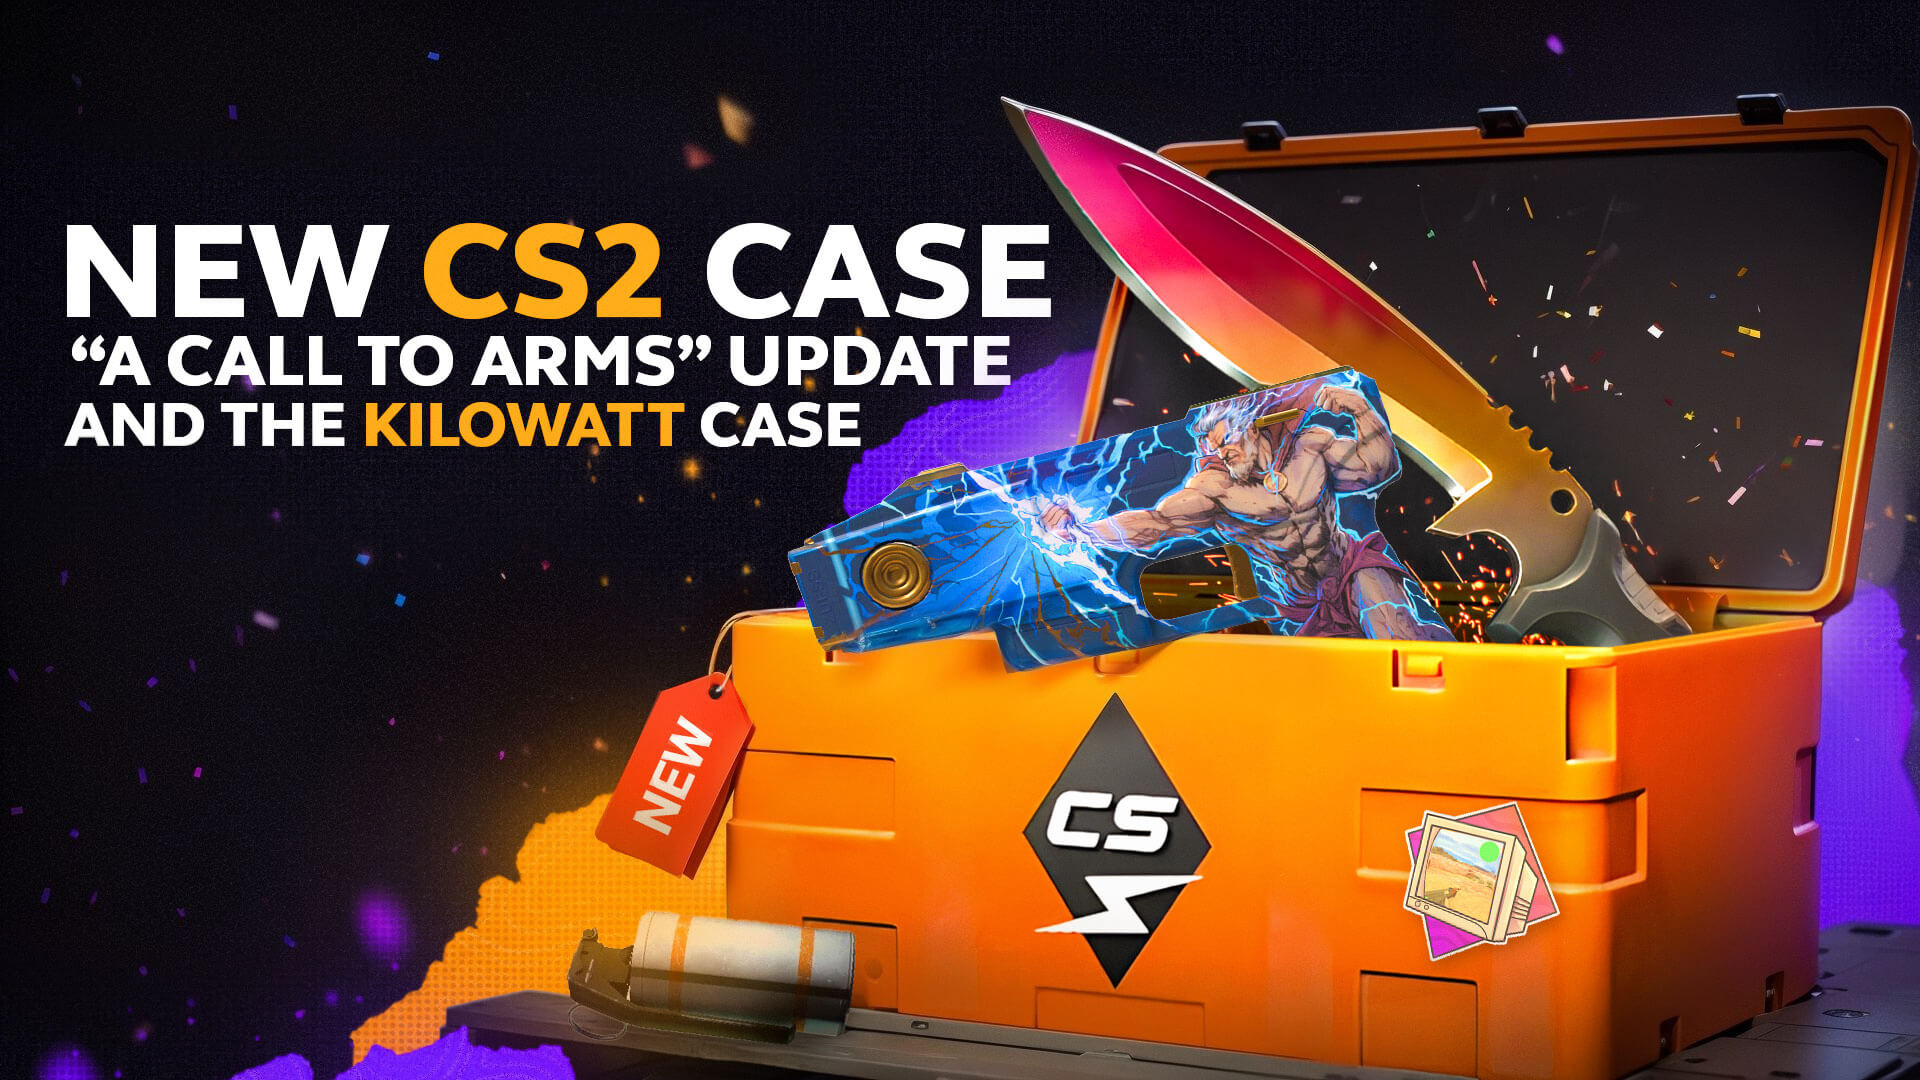 New CS2 Case: “A Call to Arms” Update and the Kilowatt Case